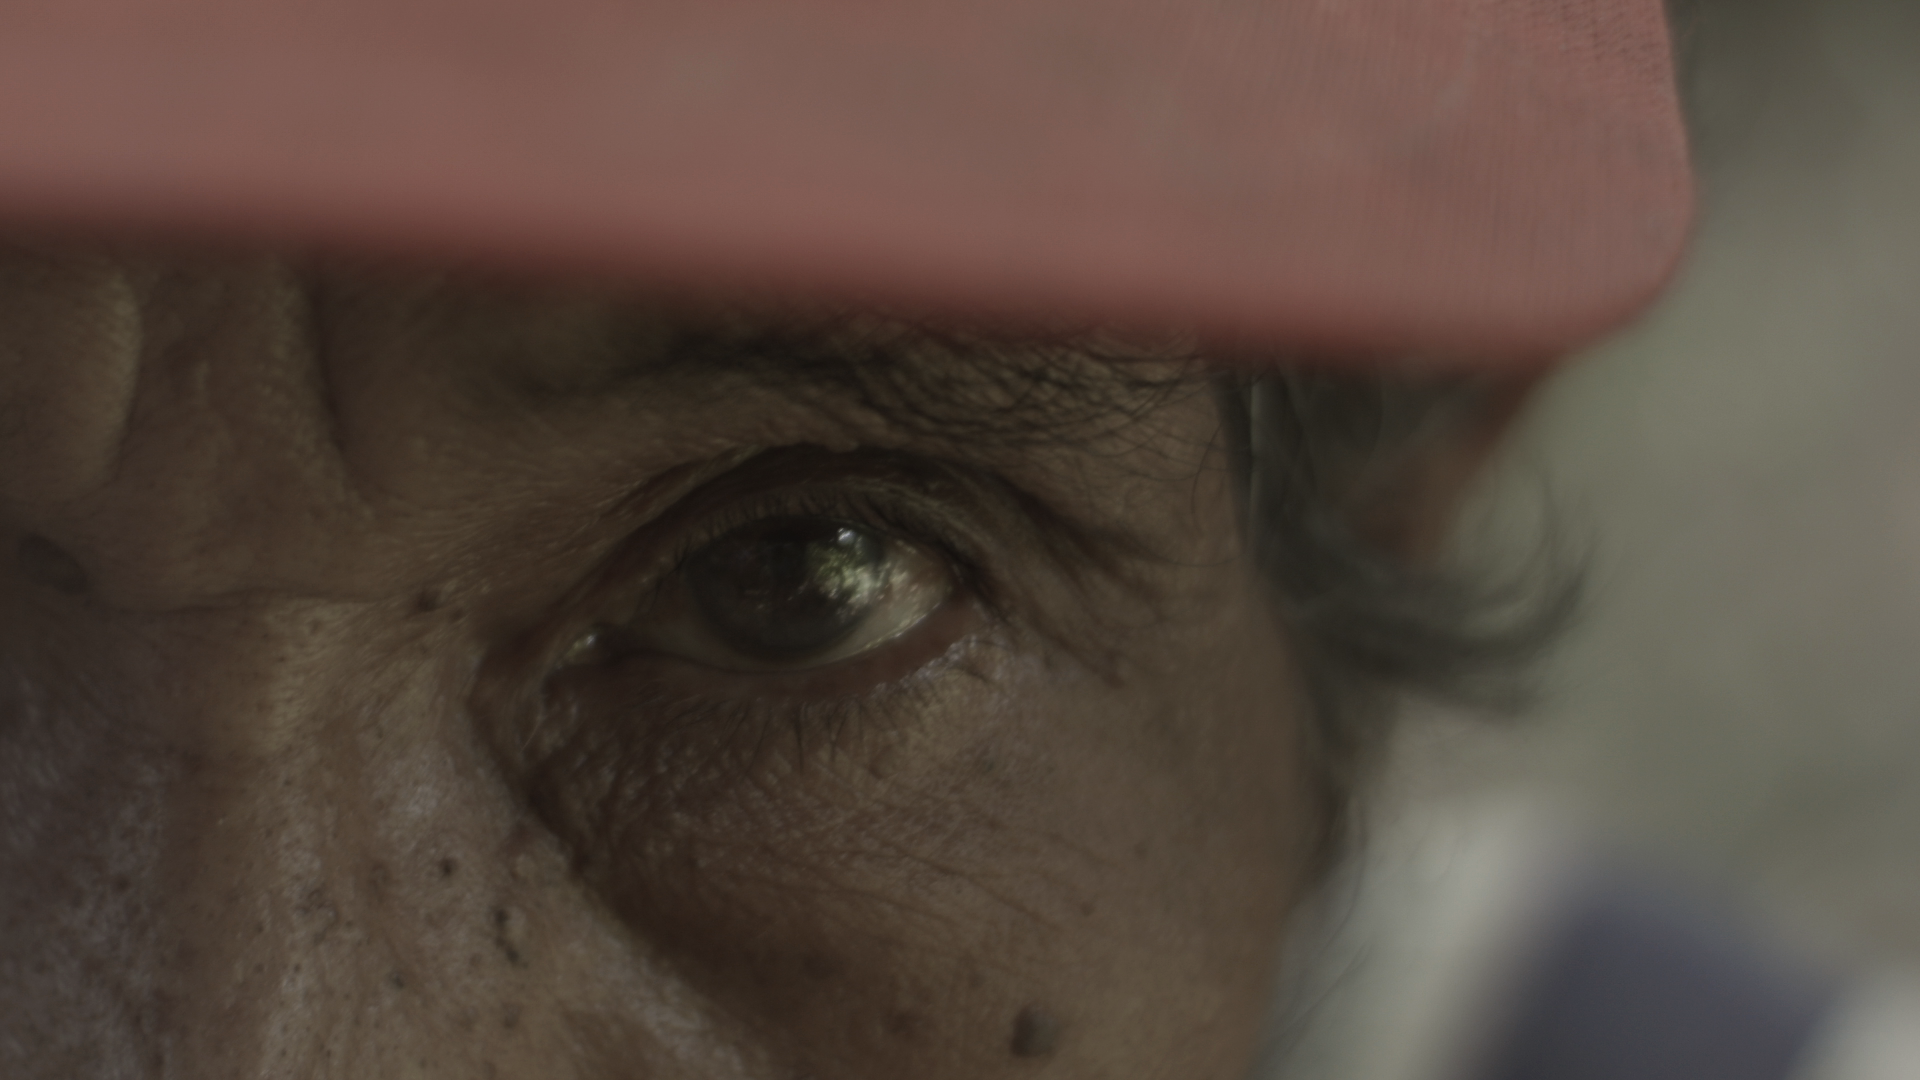 Still from 'Searching for Onoda.' Ricardo Nunez, from the farming town of Burol, who survived an Onoda attack but came away from it with a permanent limp. Photo credit: Mia Stewart.